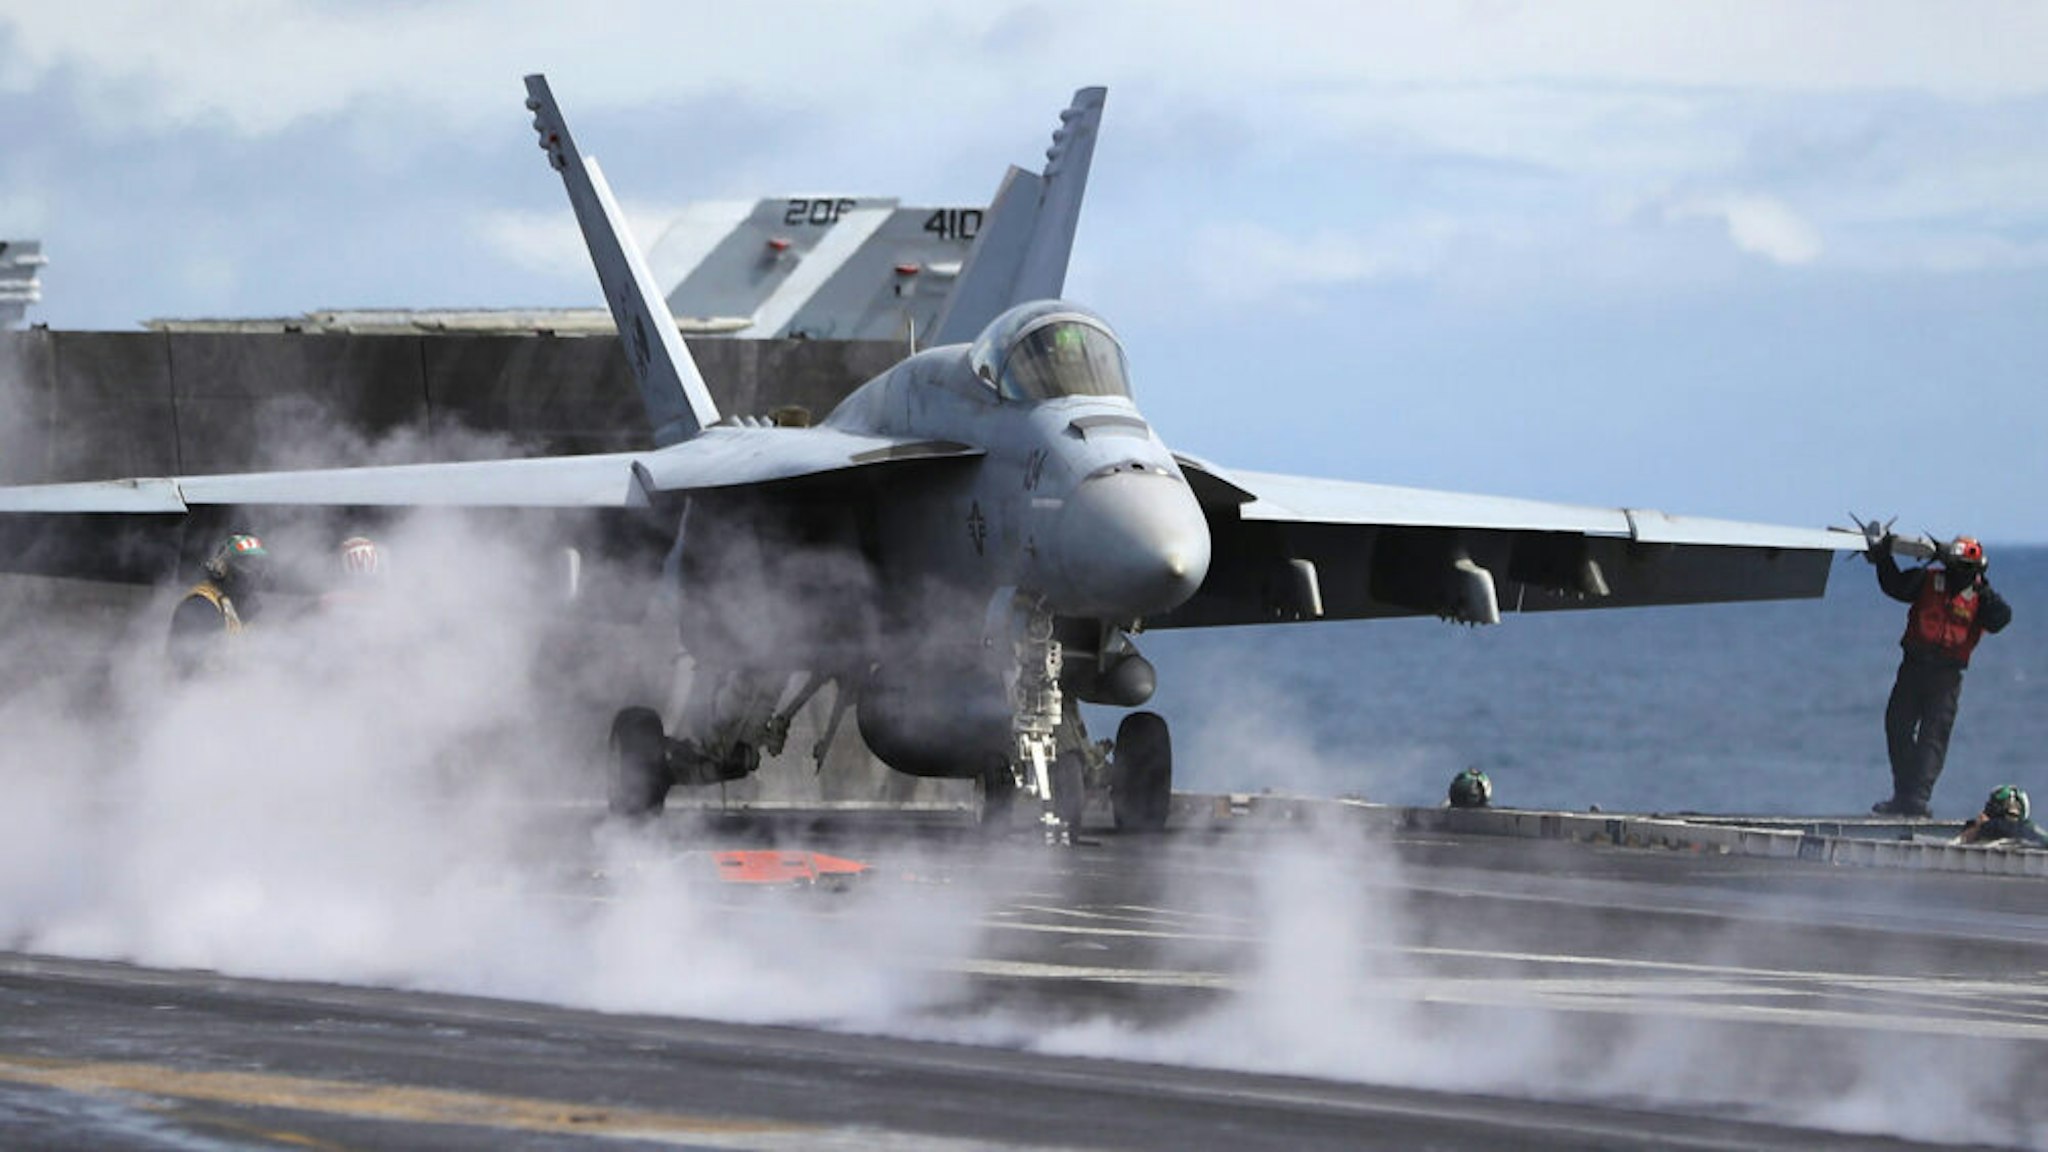 AT SEA, UNITED KINGDOM - AUGUST 06: An F/A-18 Hornet prepares for take off during joint military exercise, Saxon Warrior, aboard the USS George H.W. Bush on August 6, 2017 off the north west coast of the United Kingdom. The American Aircraft carrier the USS George HW Bush is a nuclear powered 97,000-tonne, 20 story high Nimitz class aircraft carrier. It has a 4.5-acre flight deck with around 80 combat aircraft and is home to around 5,000 US Navy personnel who are currently conducting joint military exercises off the coast of the United Kingdom.